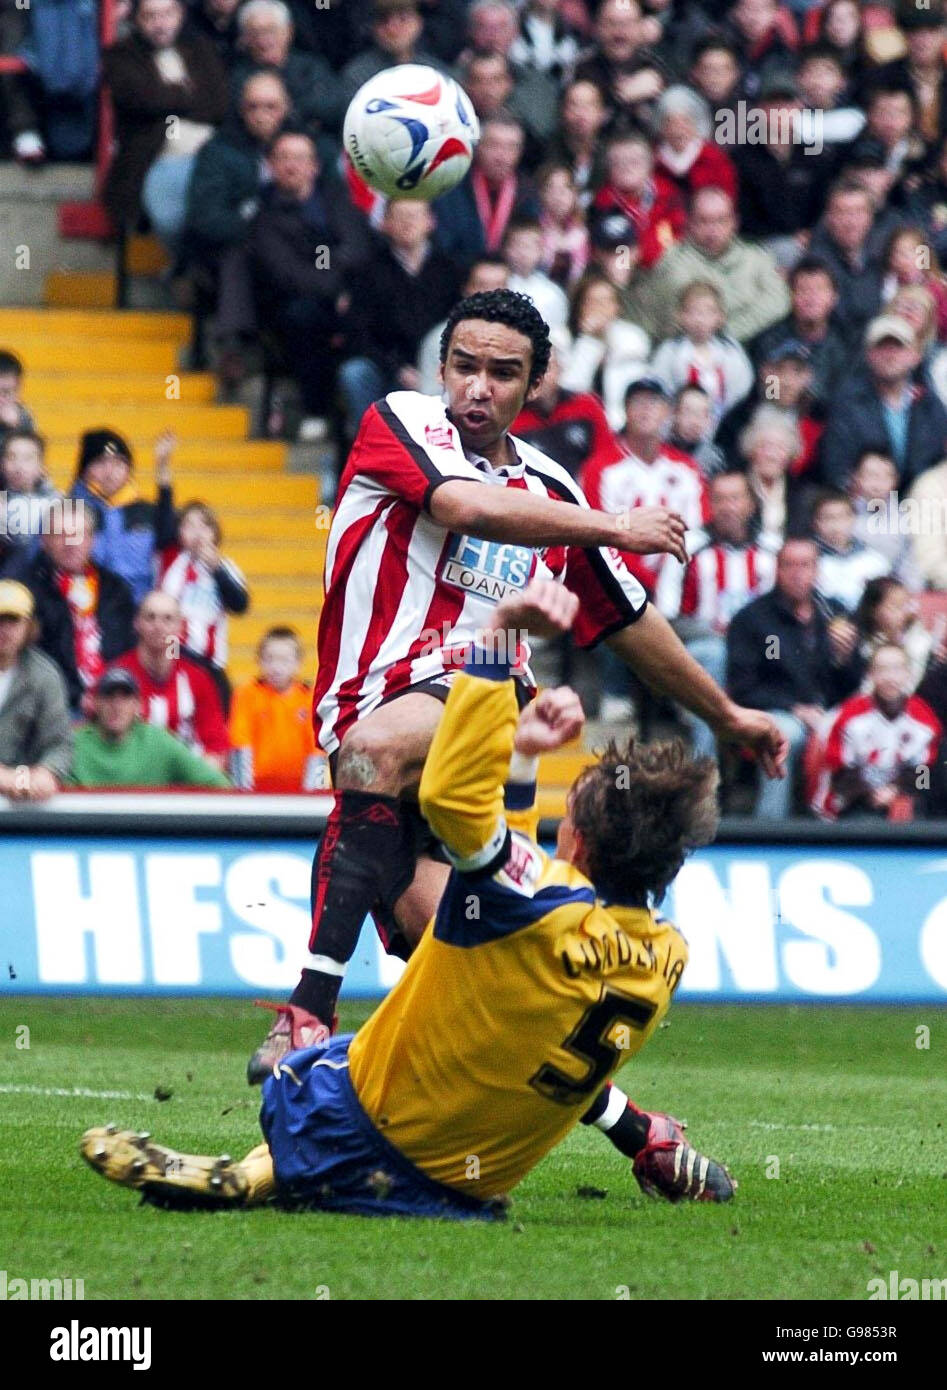 Sheffield United's Paul Ifill attempts a shot on goal as Southampton's Claus Lundekvam slides in during the Coca-Cola Championship match at Bramall Lane, Sheffield, Saturday March 25, 2006. PRESS ASSOCIATION Photo. Photo credit should read: PA. . Stock Photo